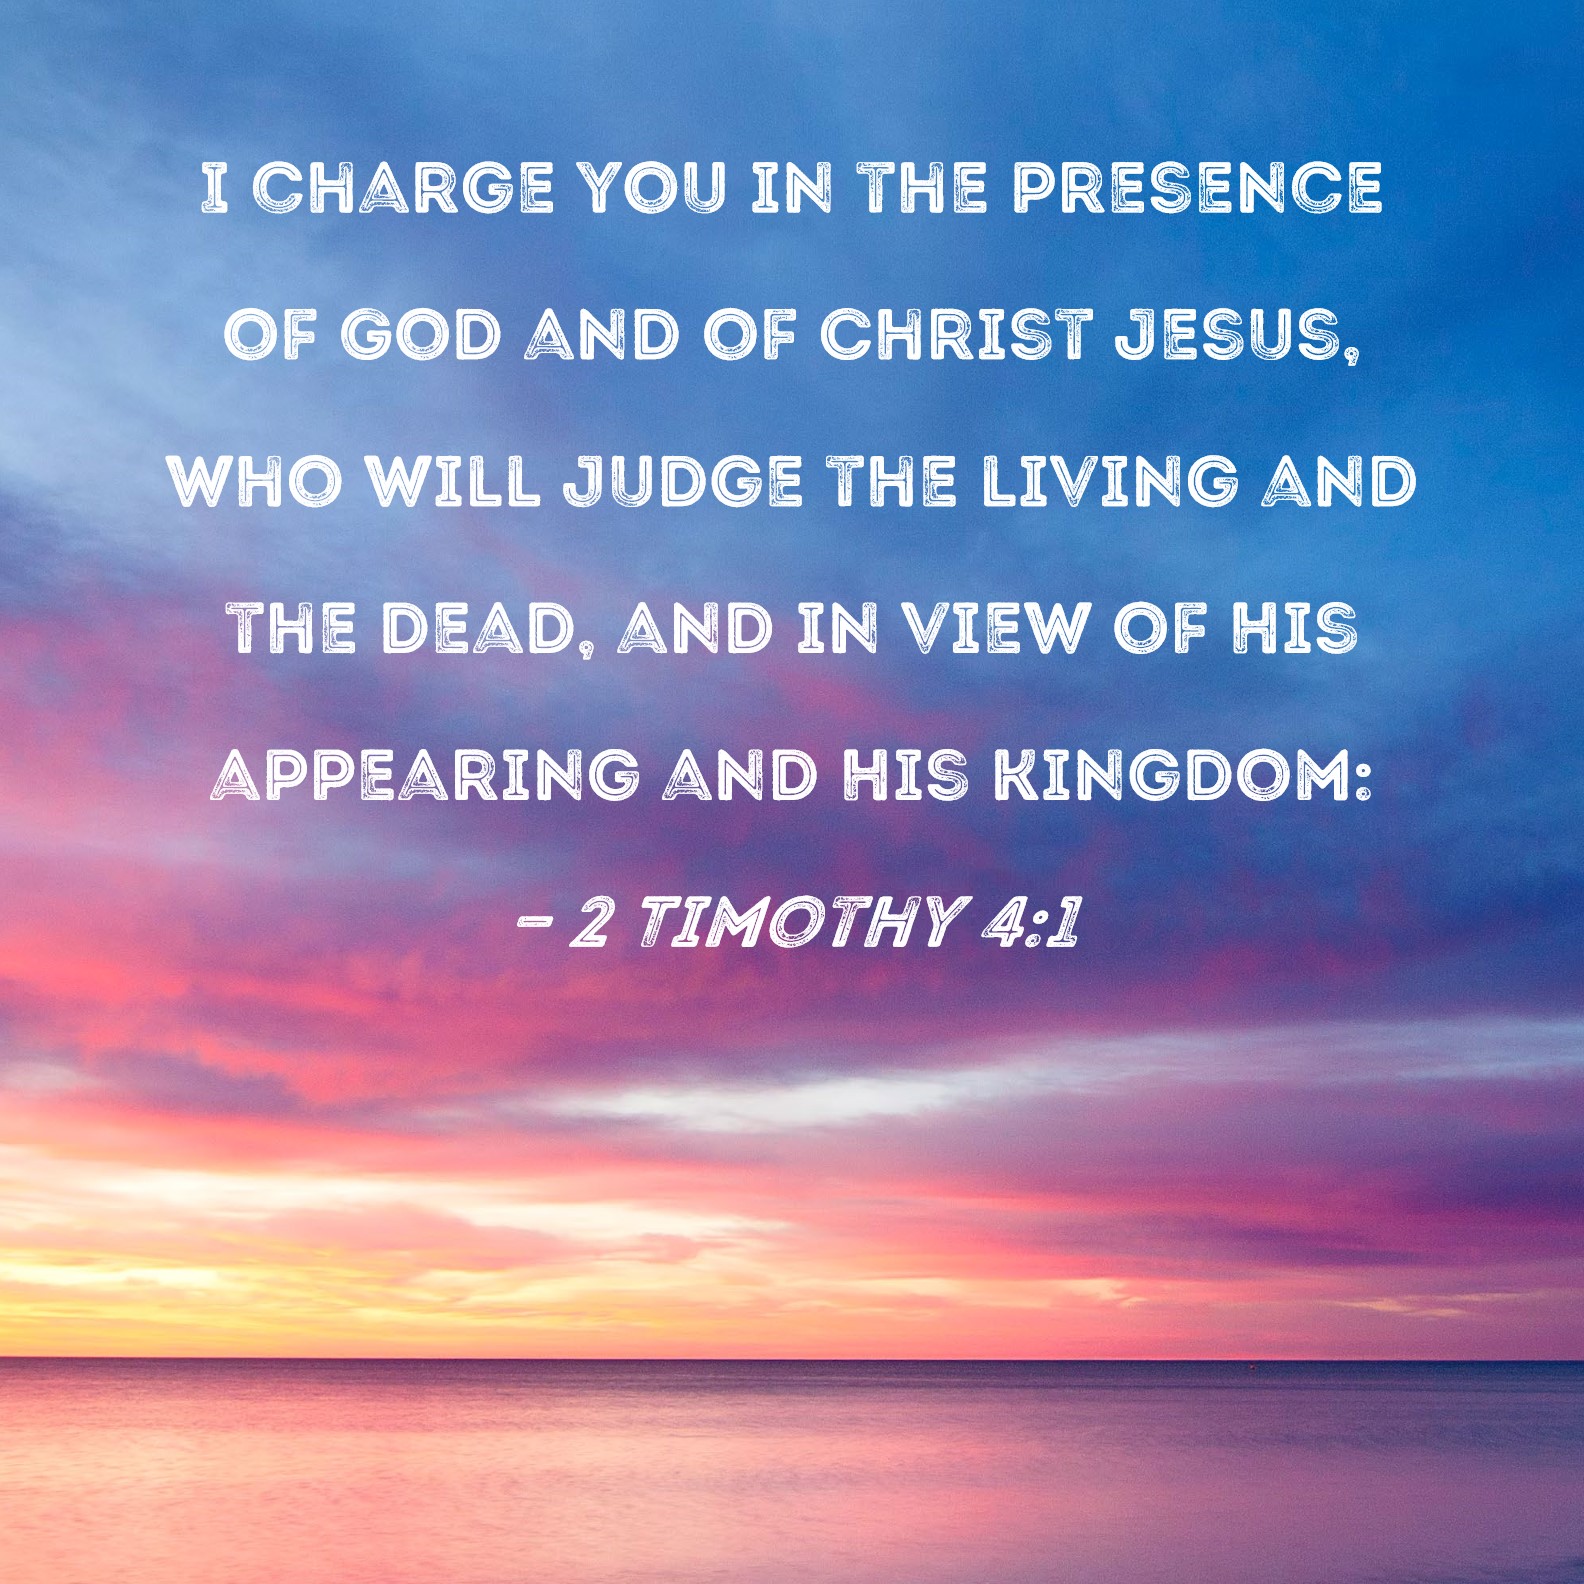 Uegnet Sjov vitalitet 2 Timothy 4:1 I charge you in the presence of God and of Christ Jesus, who  will judge the living and the dead, and in view of His appearing and His  kingdom: